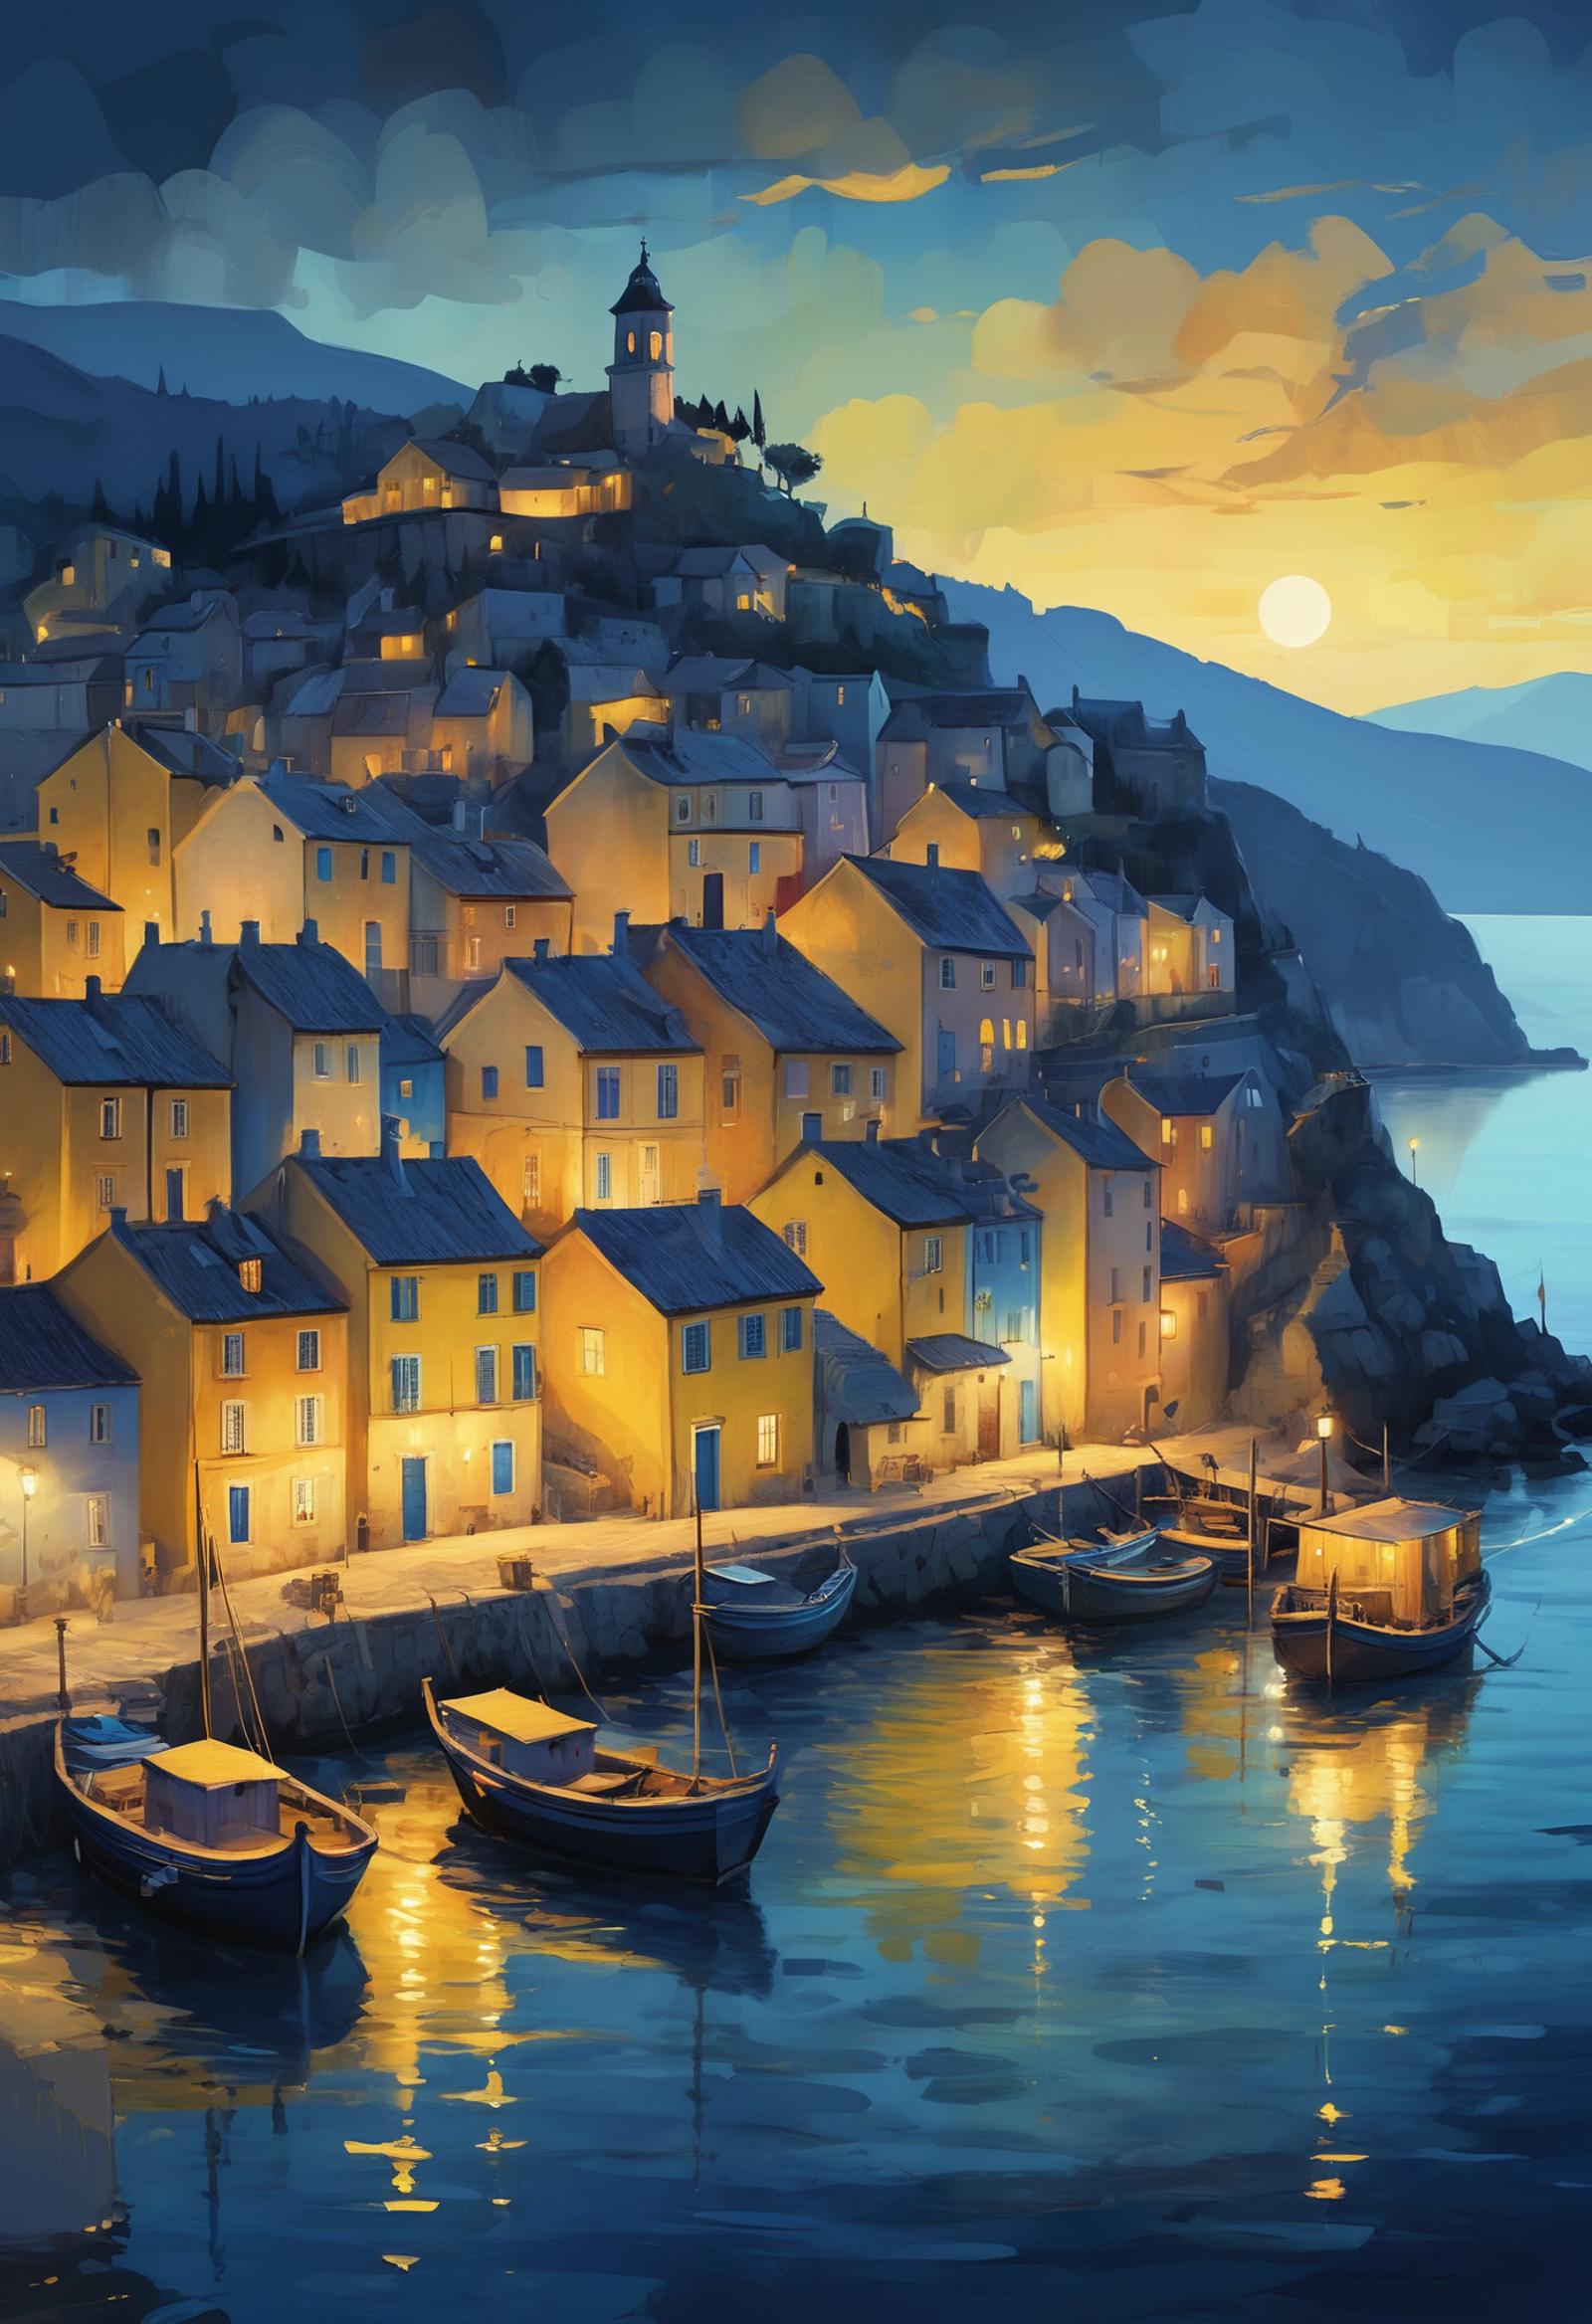 A picturesque waterfront village with boats and houses at sunset.